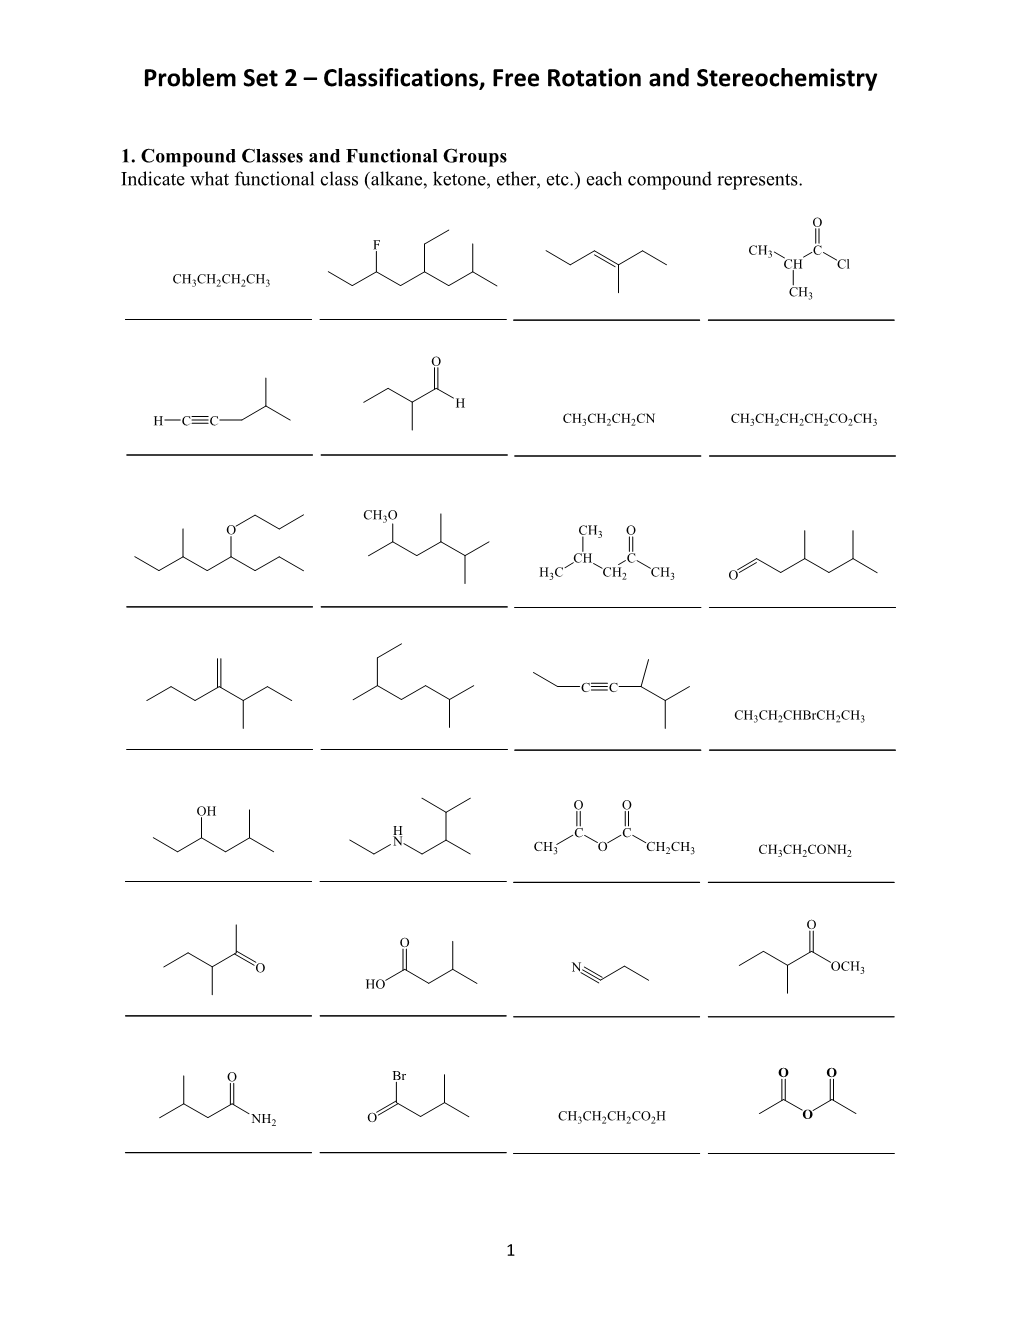 Problem Set 2 Classifications, Free Rotation and Stereochemistry